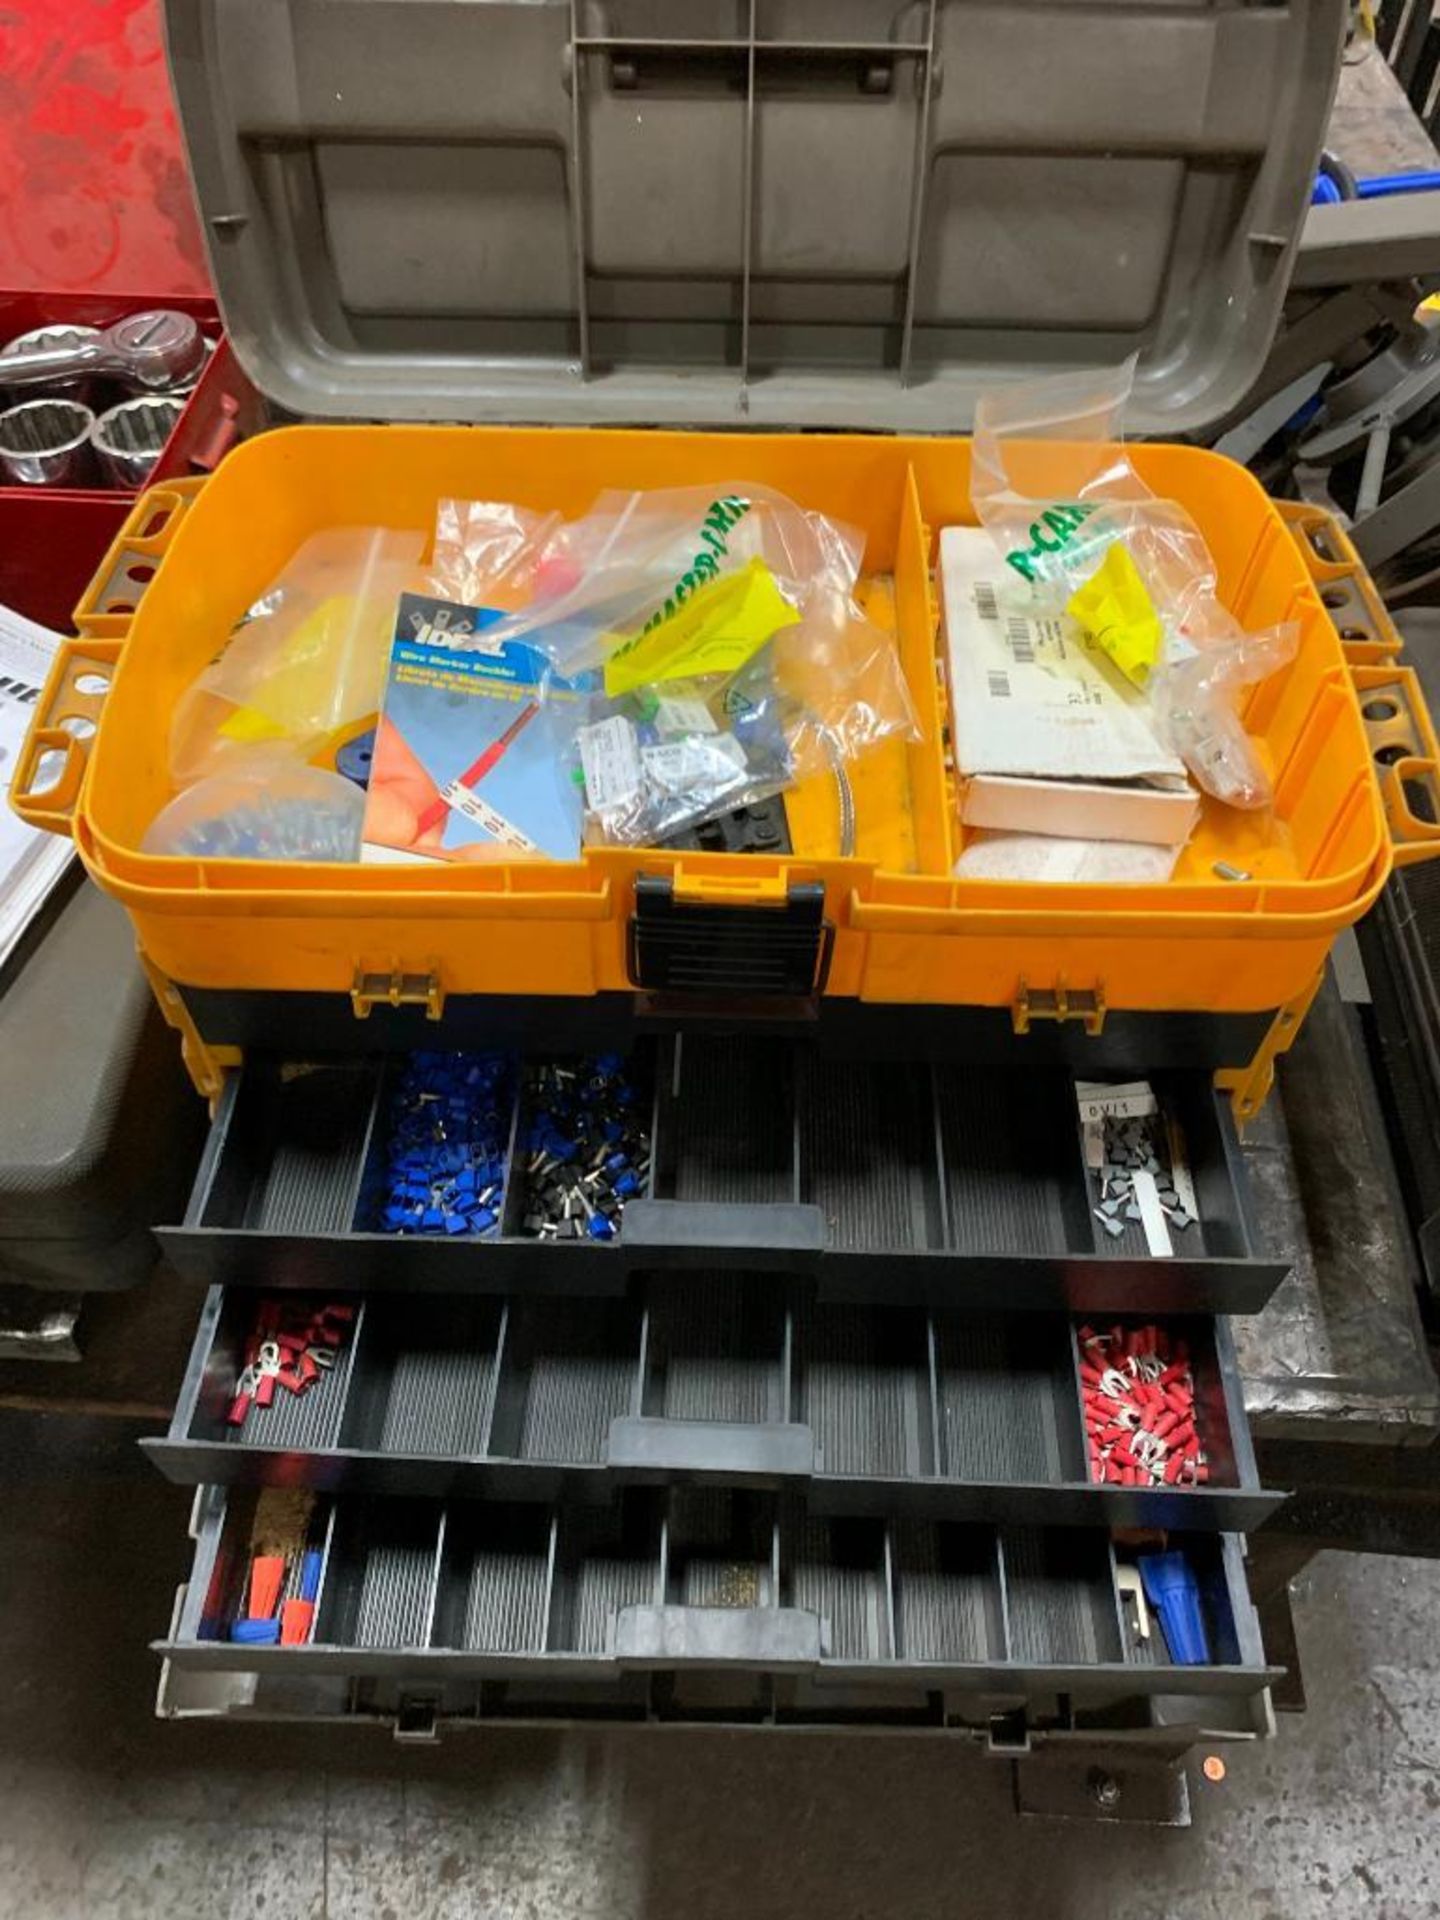 PLANO TACKLE BOX, W/ ELECTRICAL SUPPLIES - Image 3 of 3